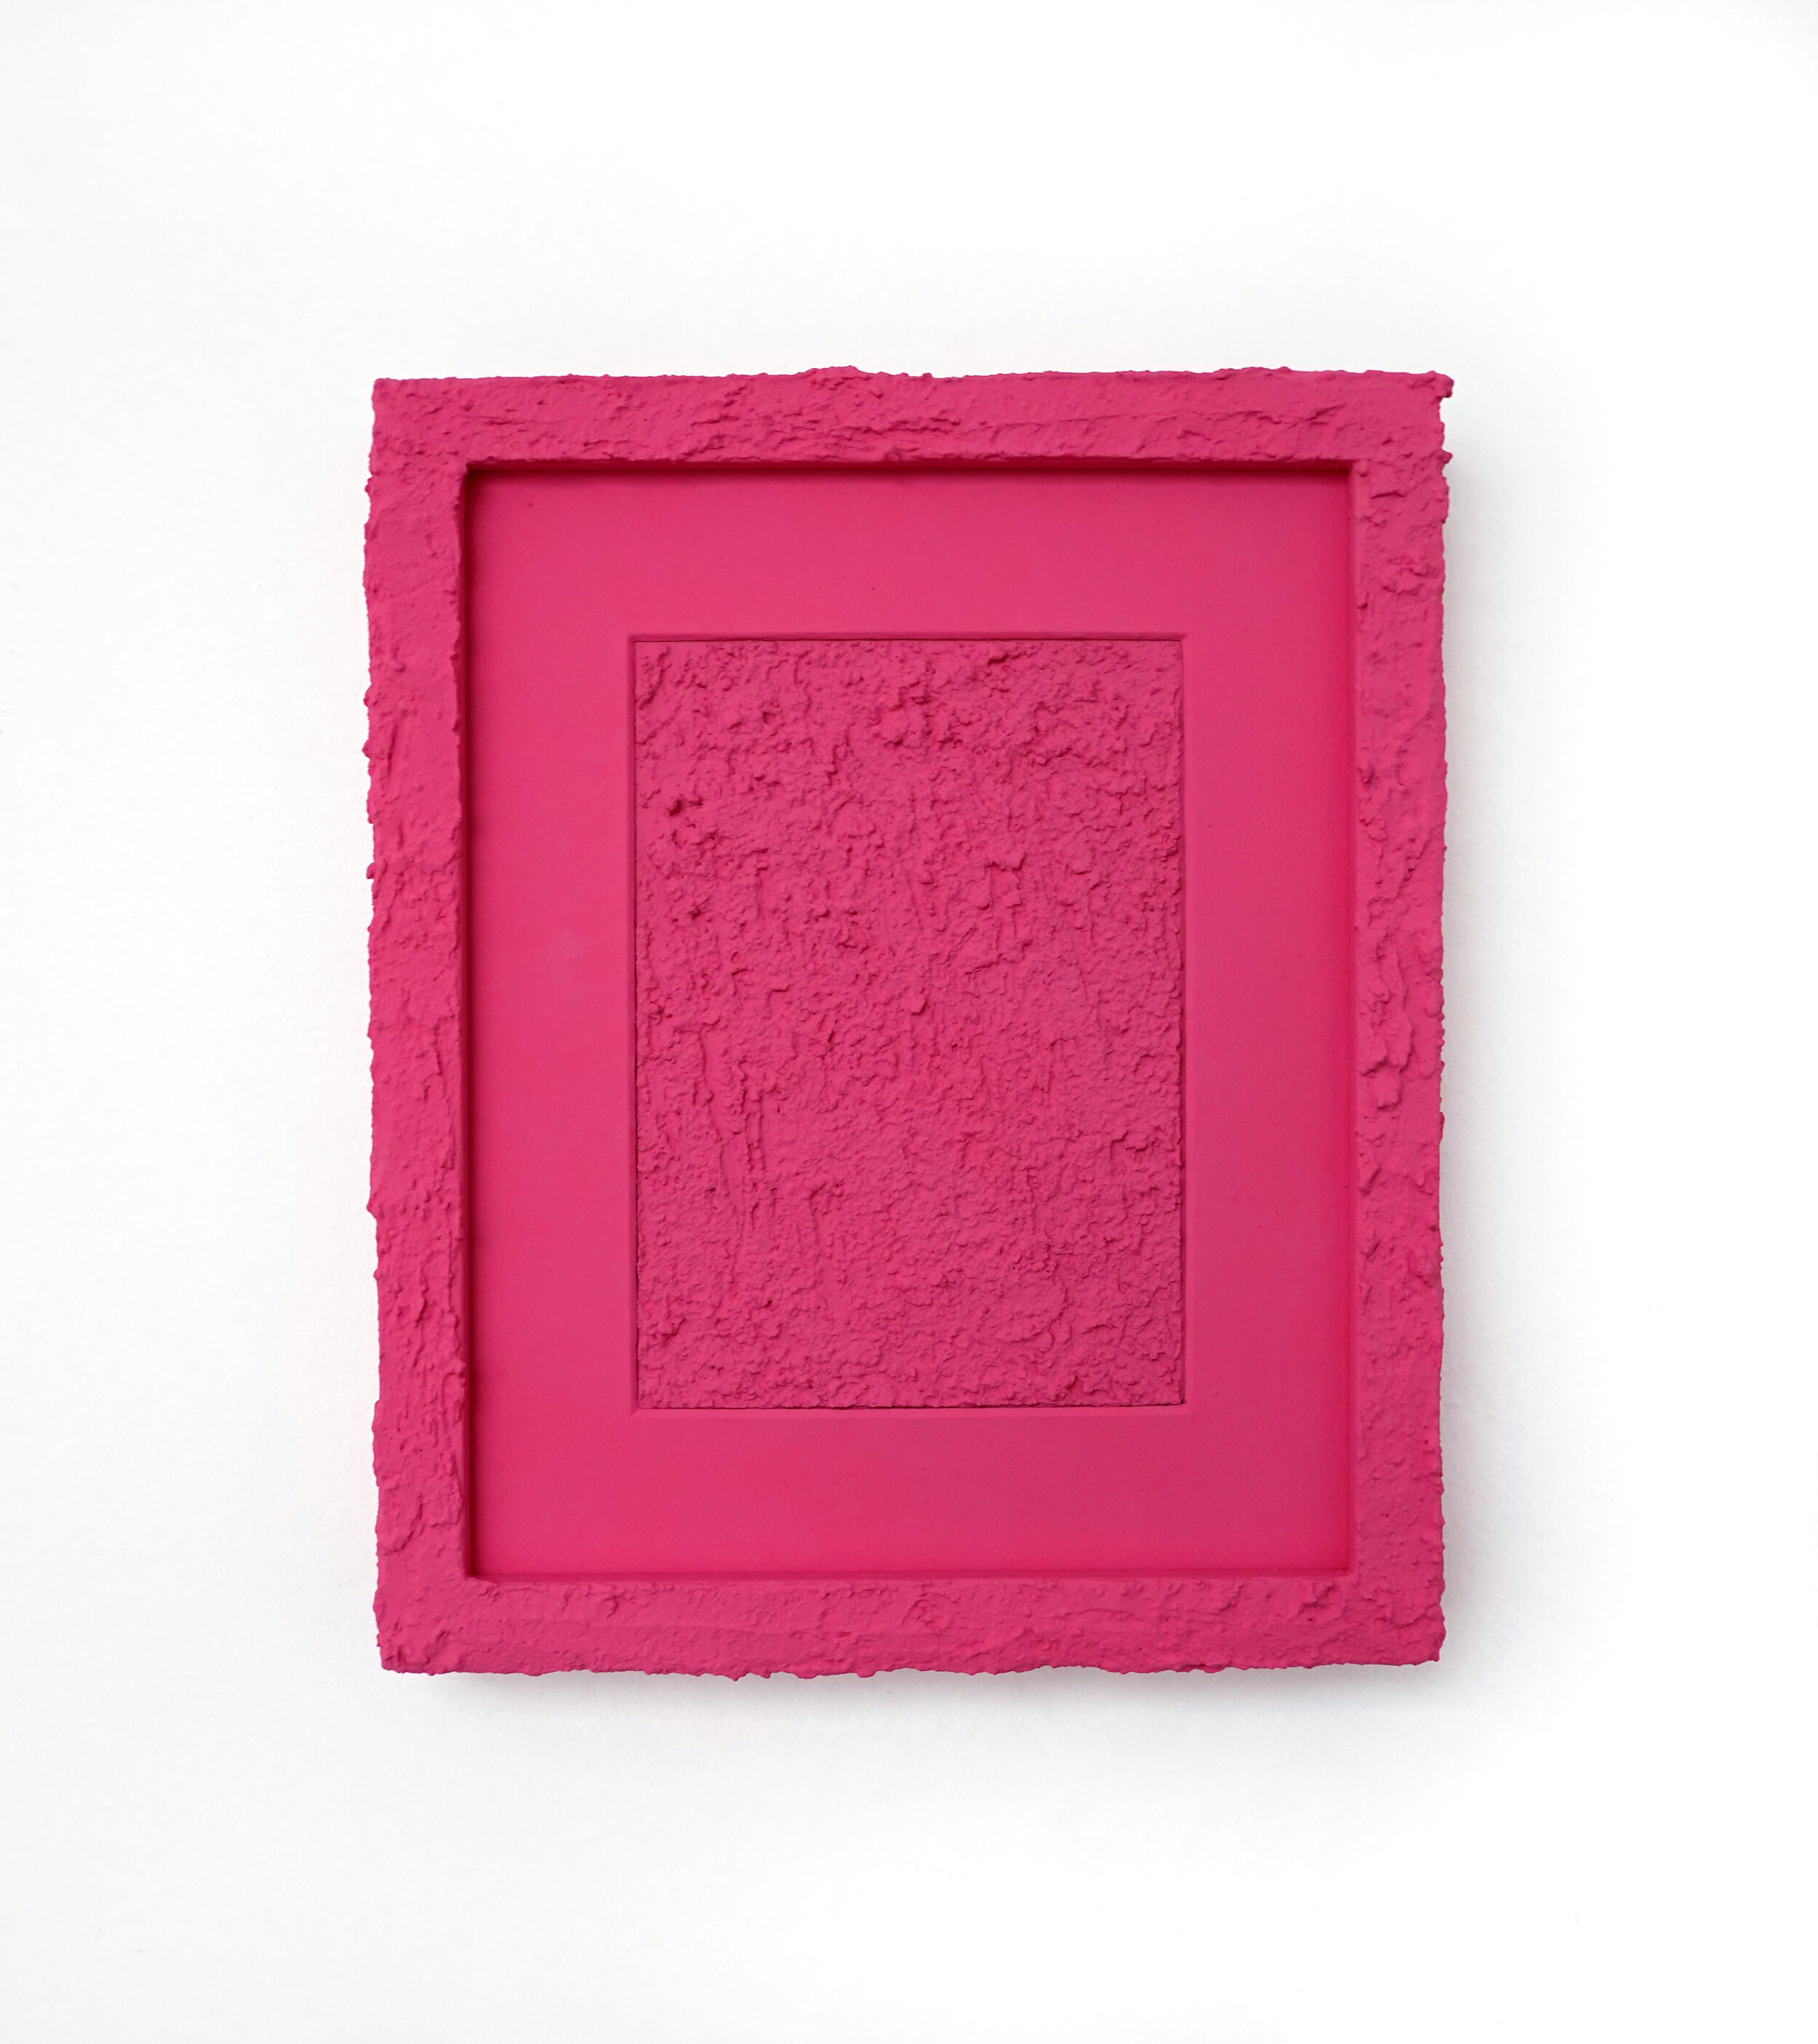  Wall within a wall (Pink), 2020, acrylic, flashe, and stucco on paper and wood, 11.5 x 9.5” 